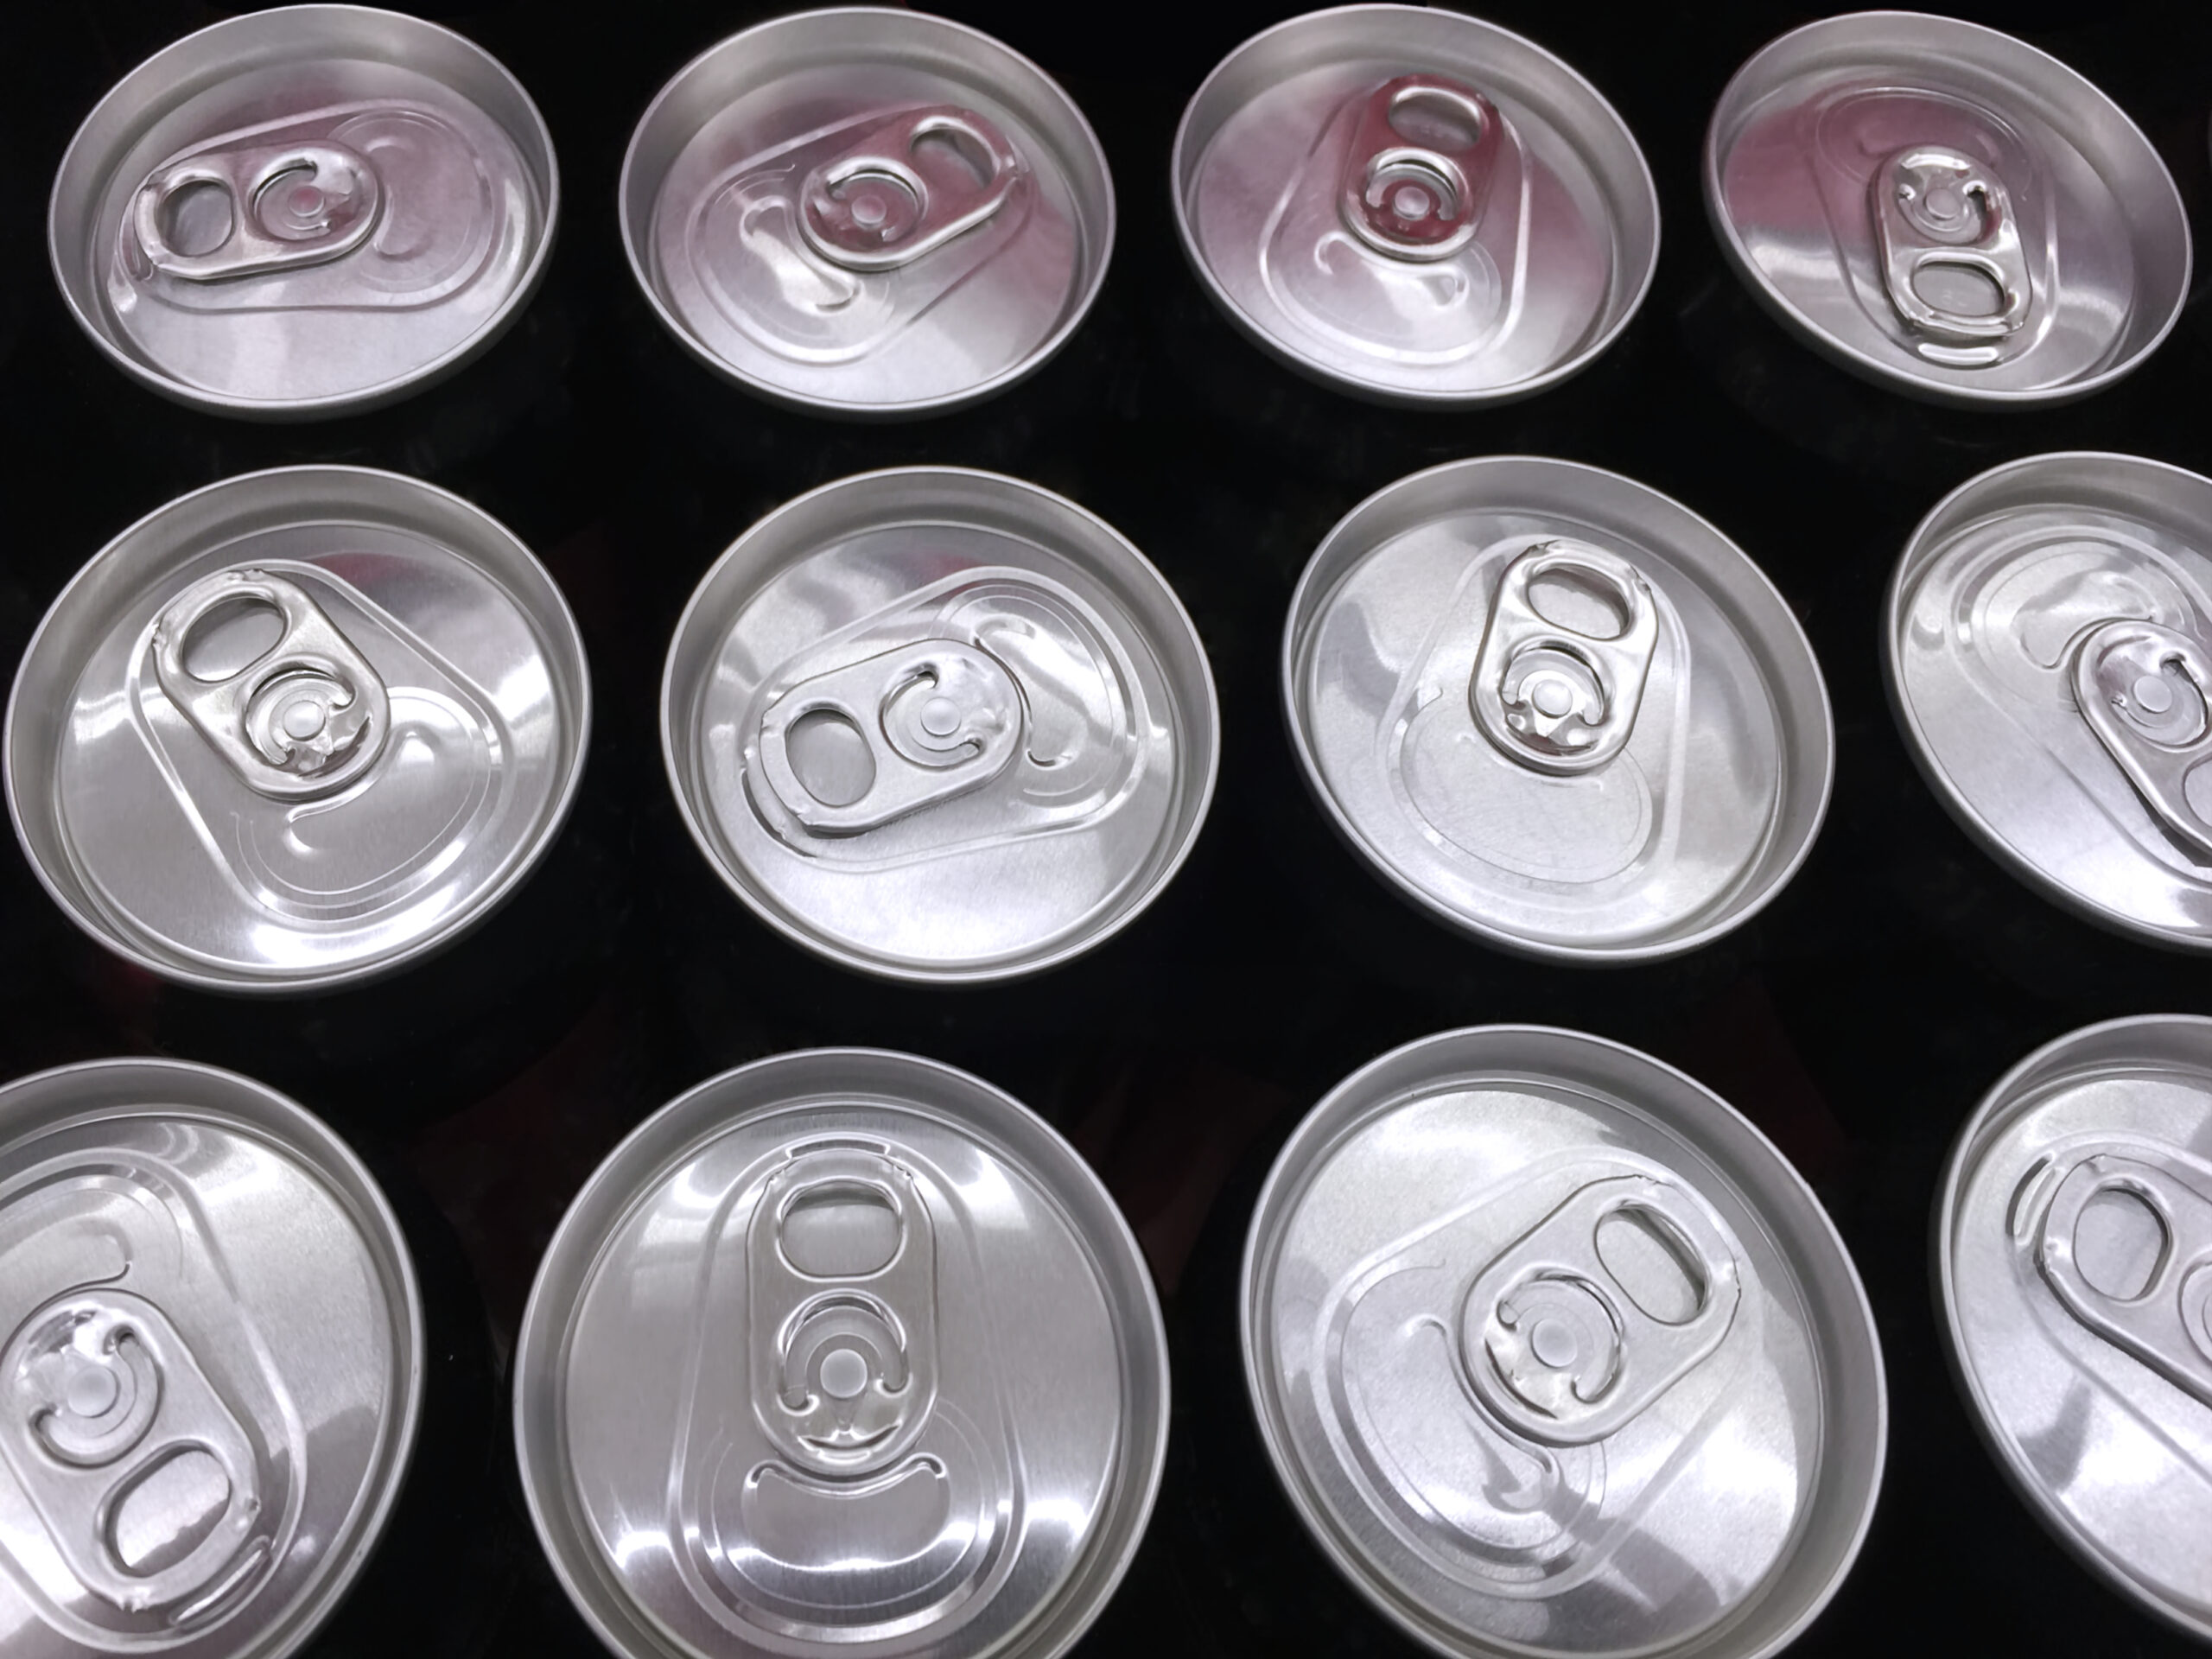 soda cans as an example of ultra-processed foods